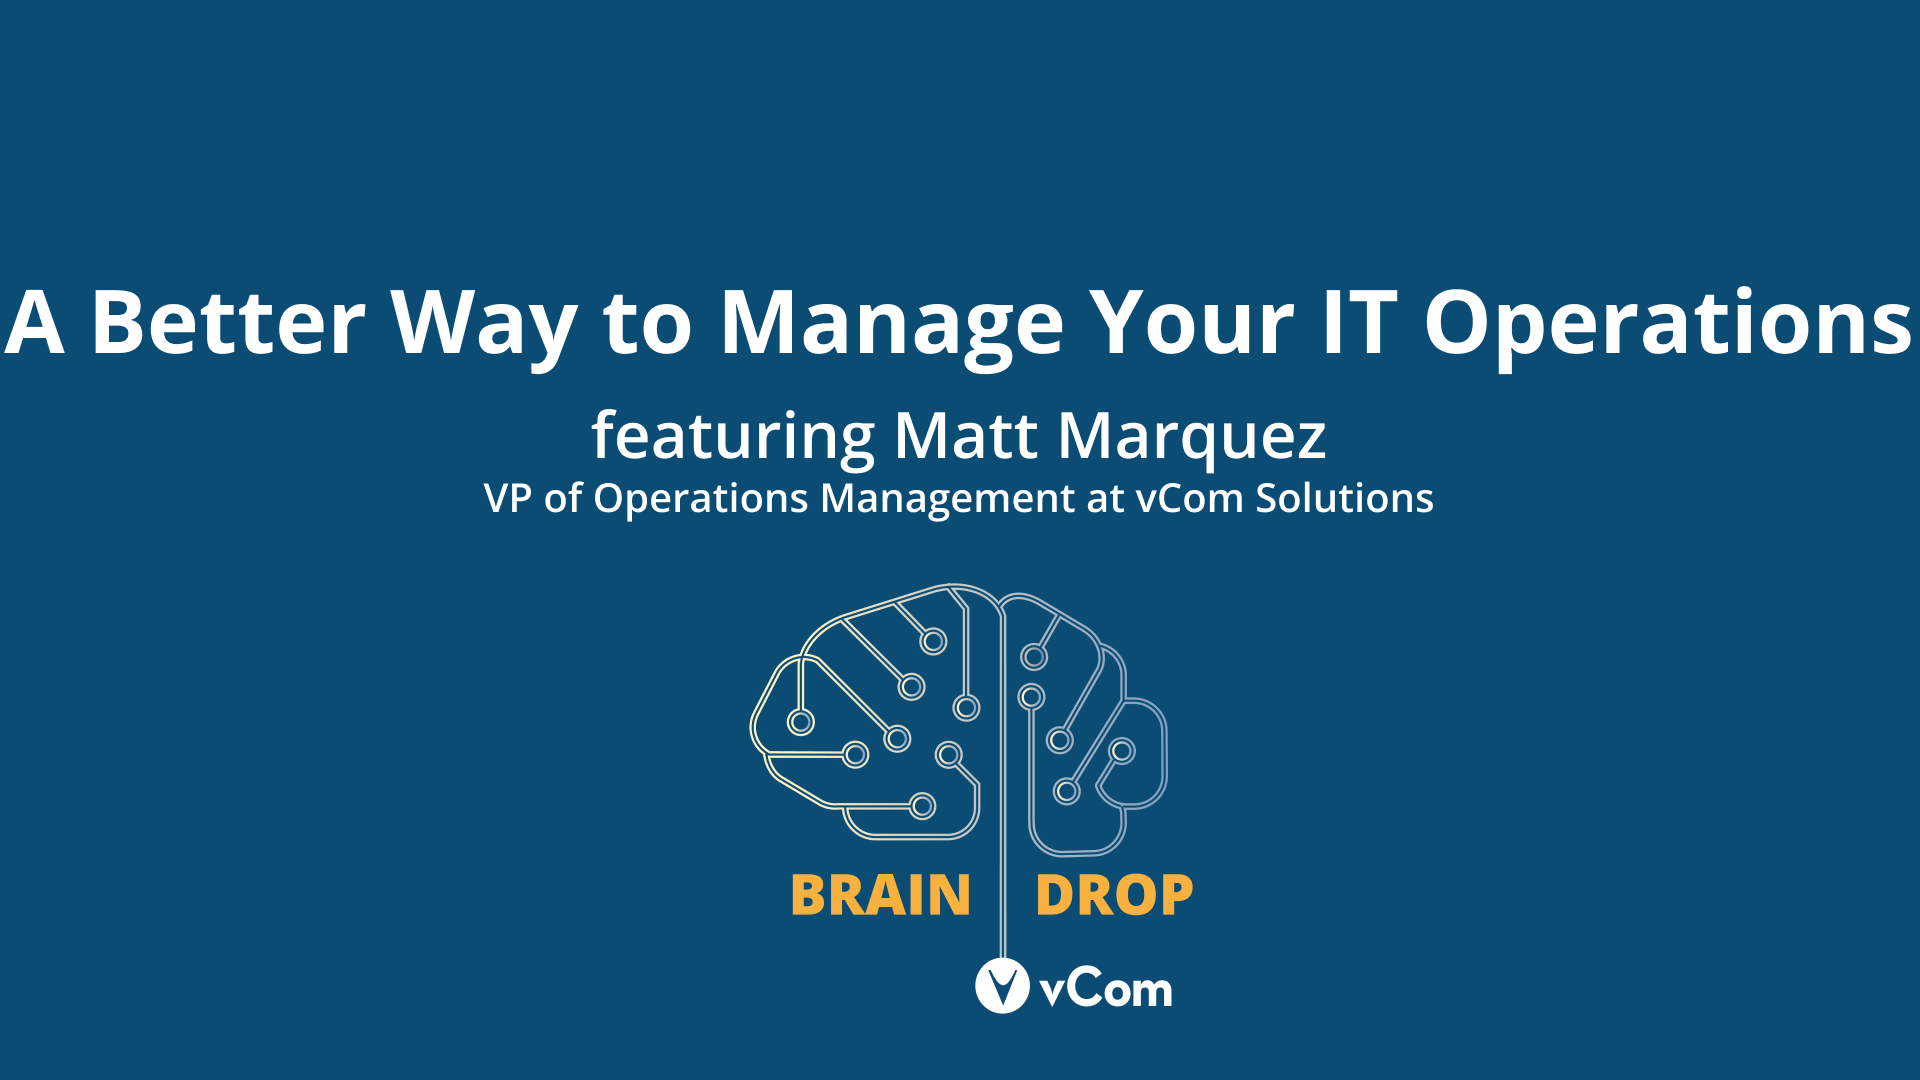 A Better Way to Manage IT Operations with Matt Marquez